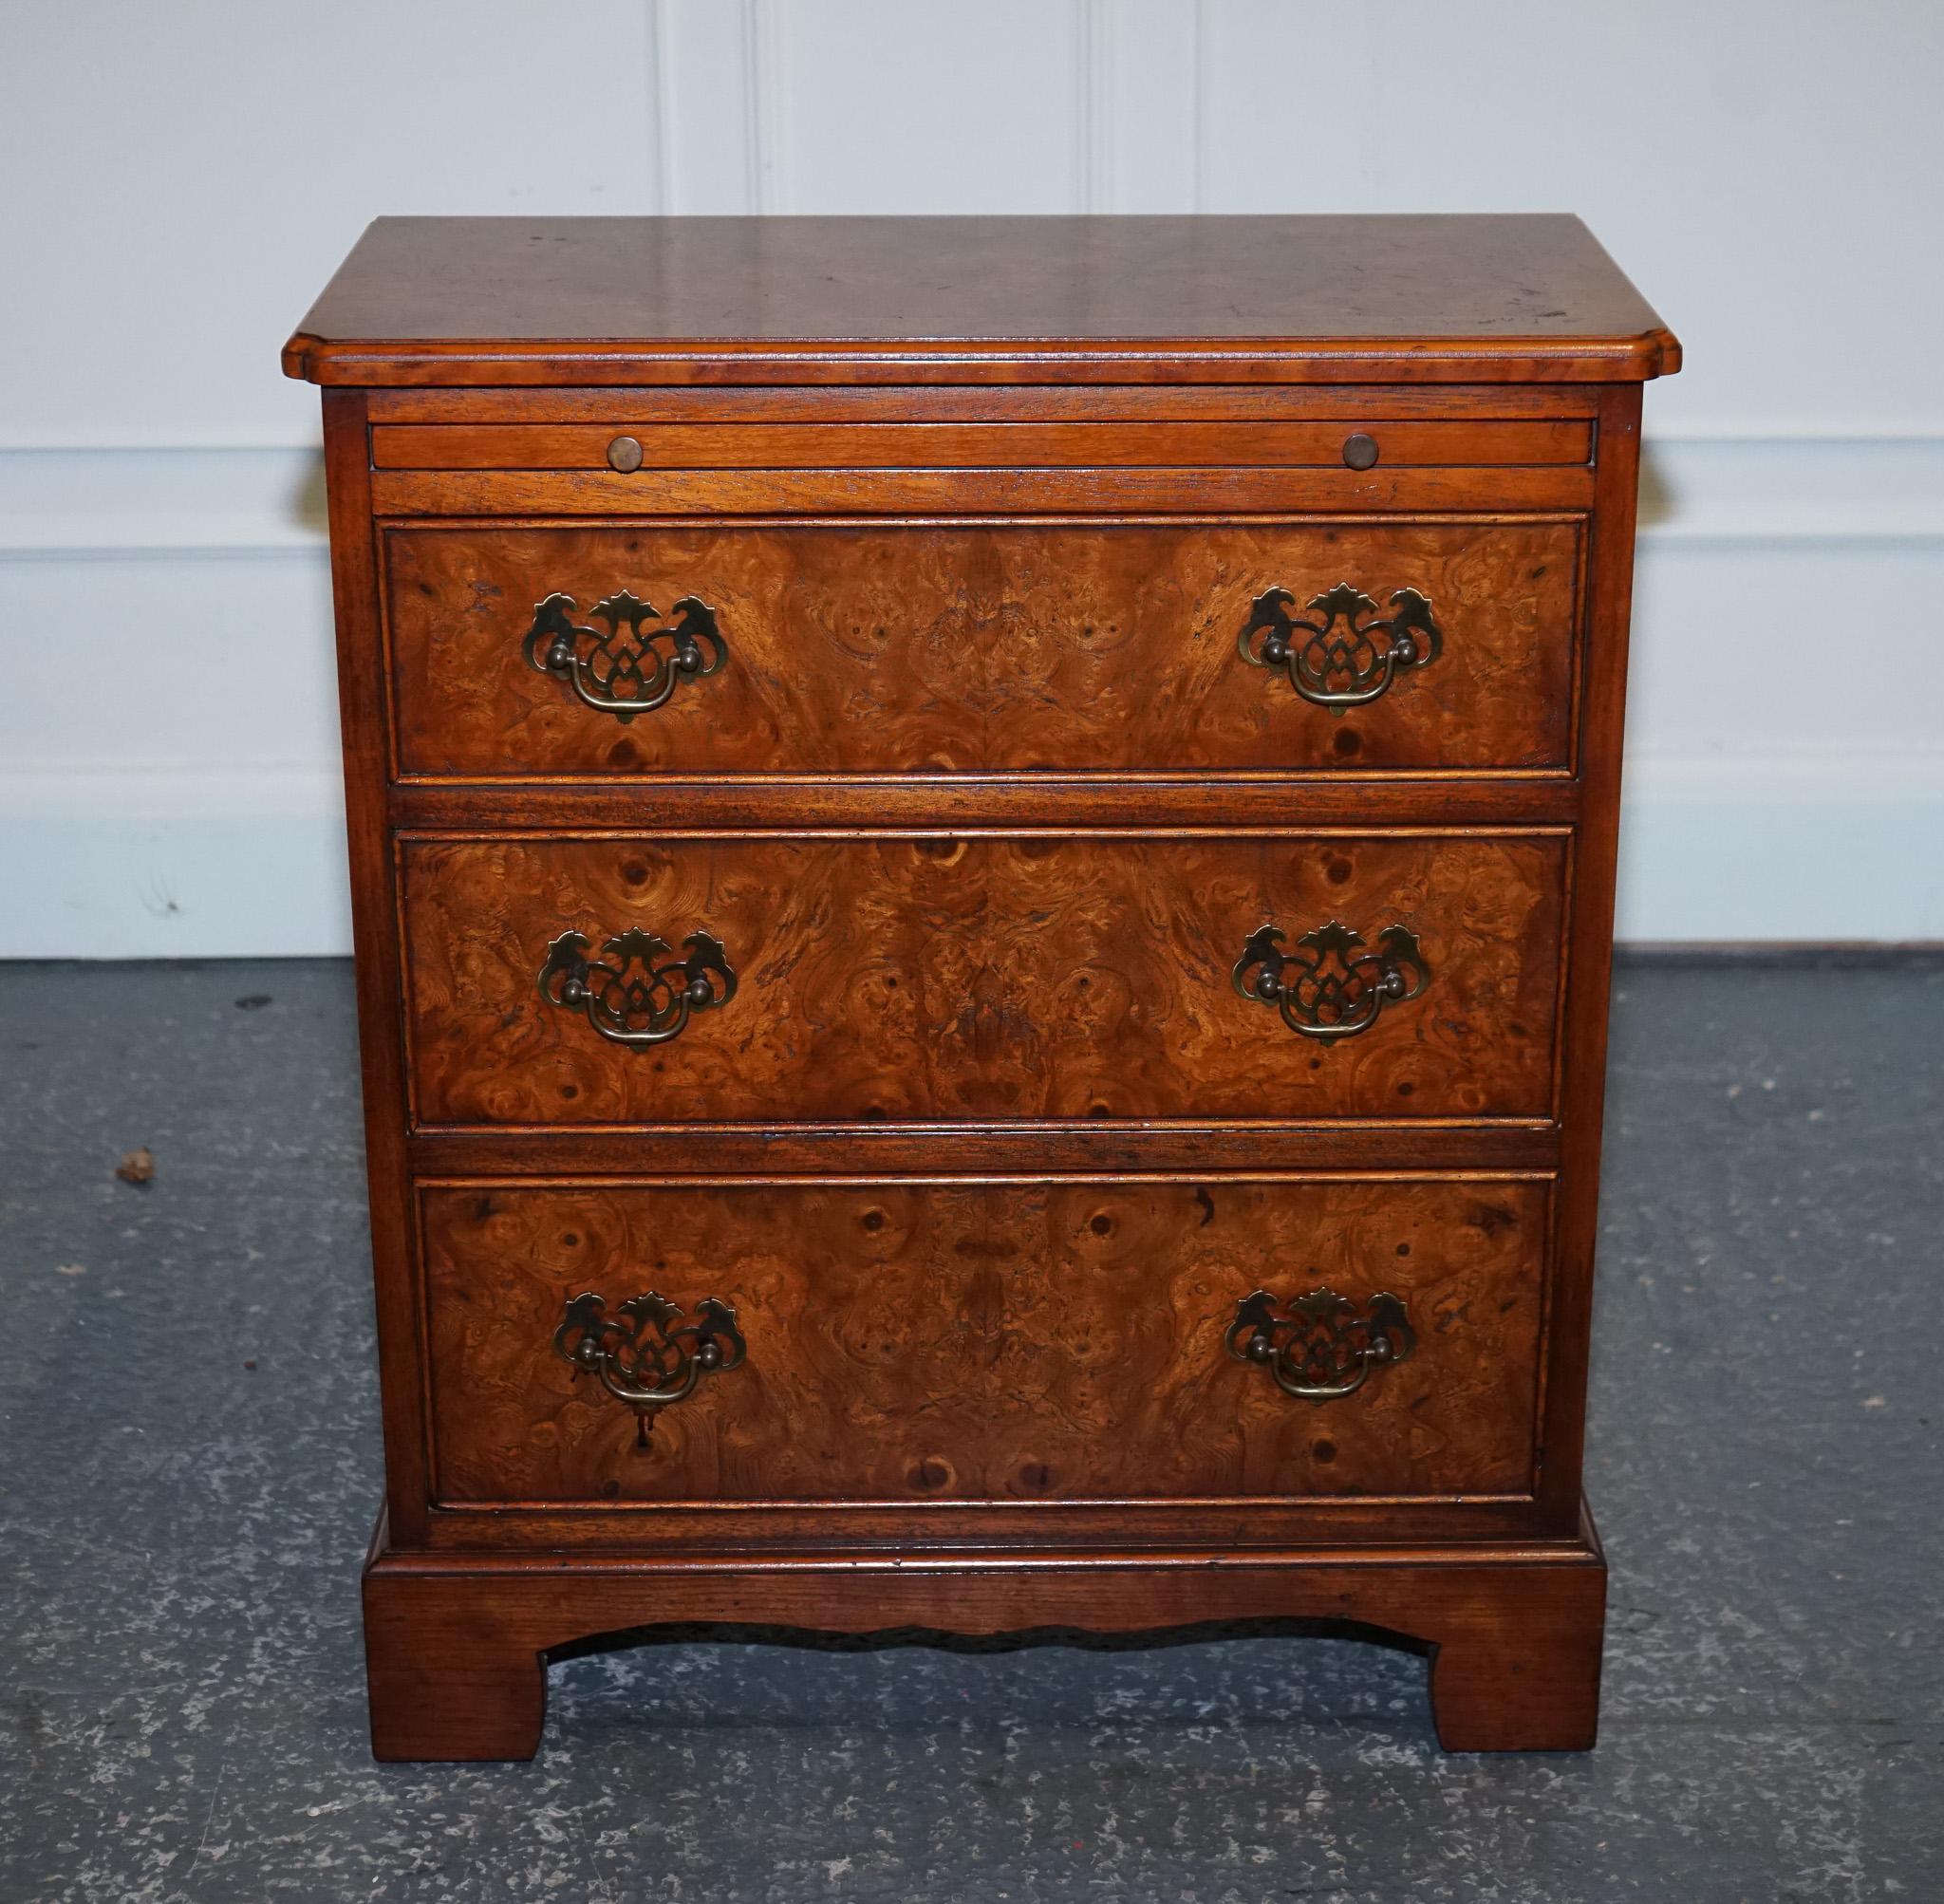 LOVELY VINTAGE BURR WALNUT BACHERLORS CHEST OF DRAWERS WITH A BUTLER SLiDE In Good Condition For Sale In Pulborough, GB